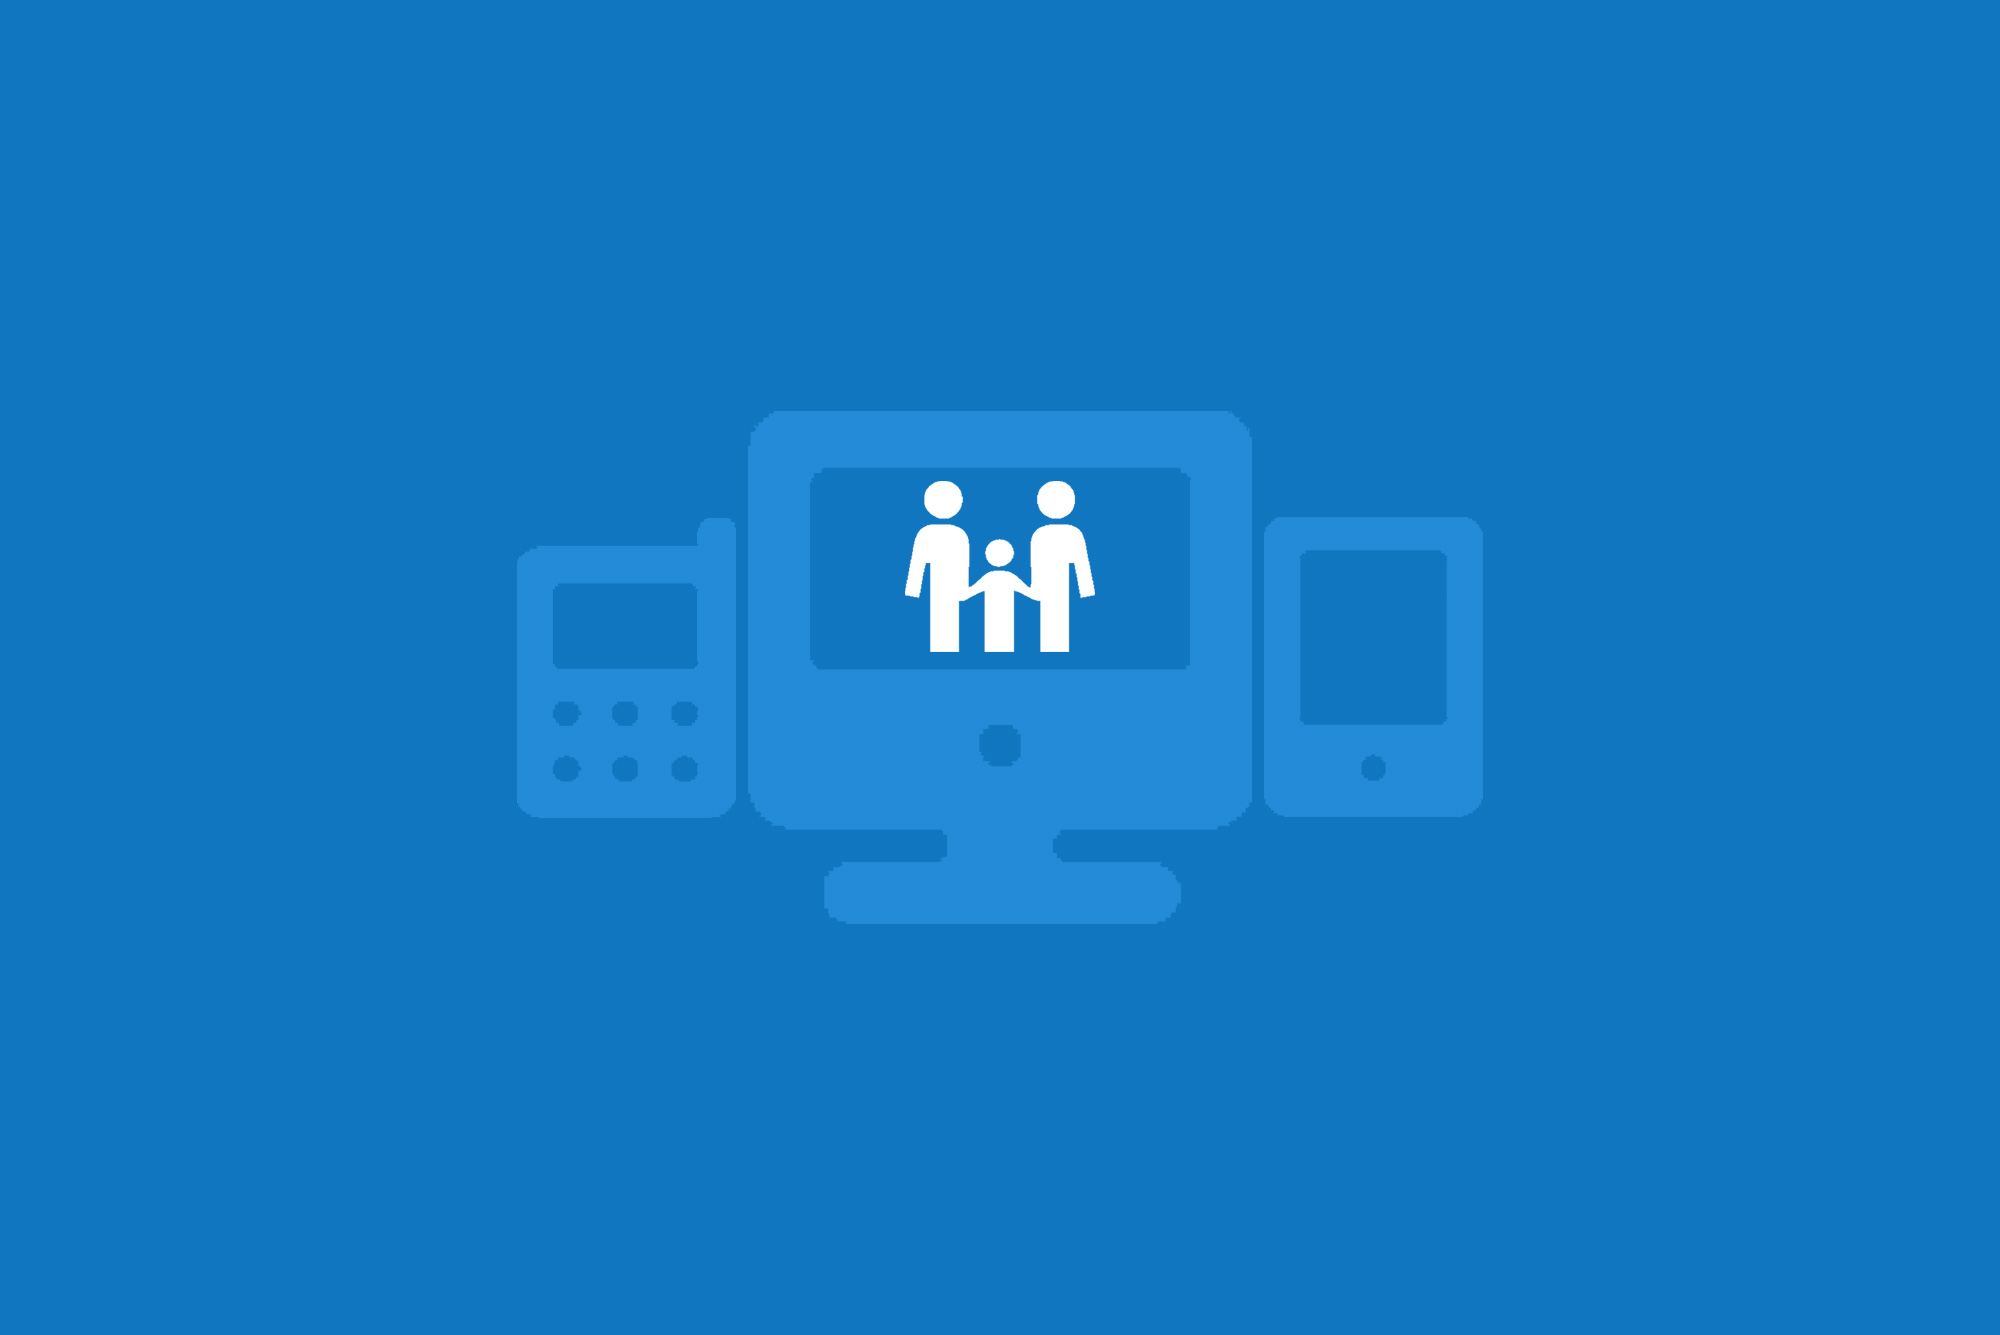 Online safety. Mobile, computer and tablet icons with family icon in the middle on blue background.